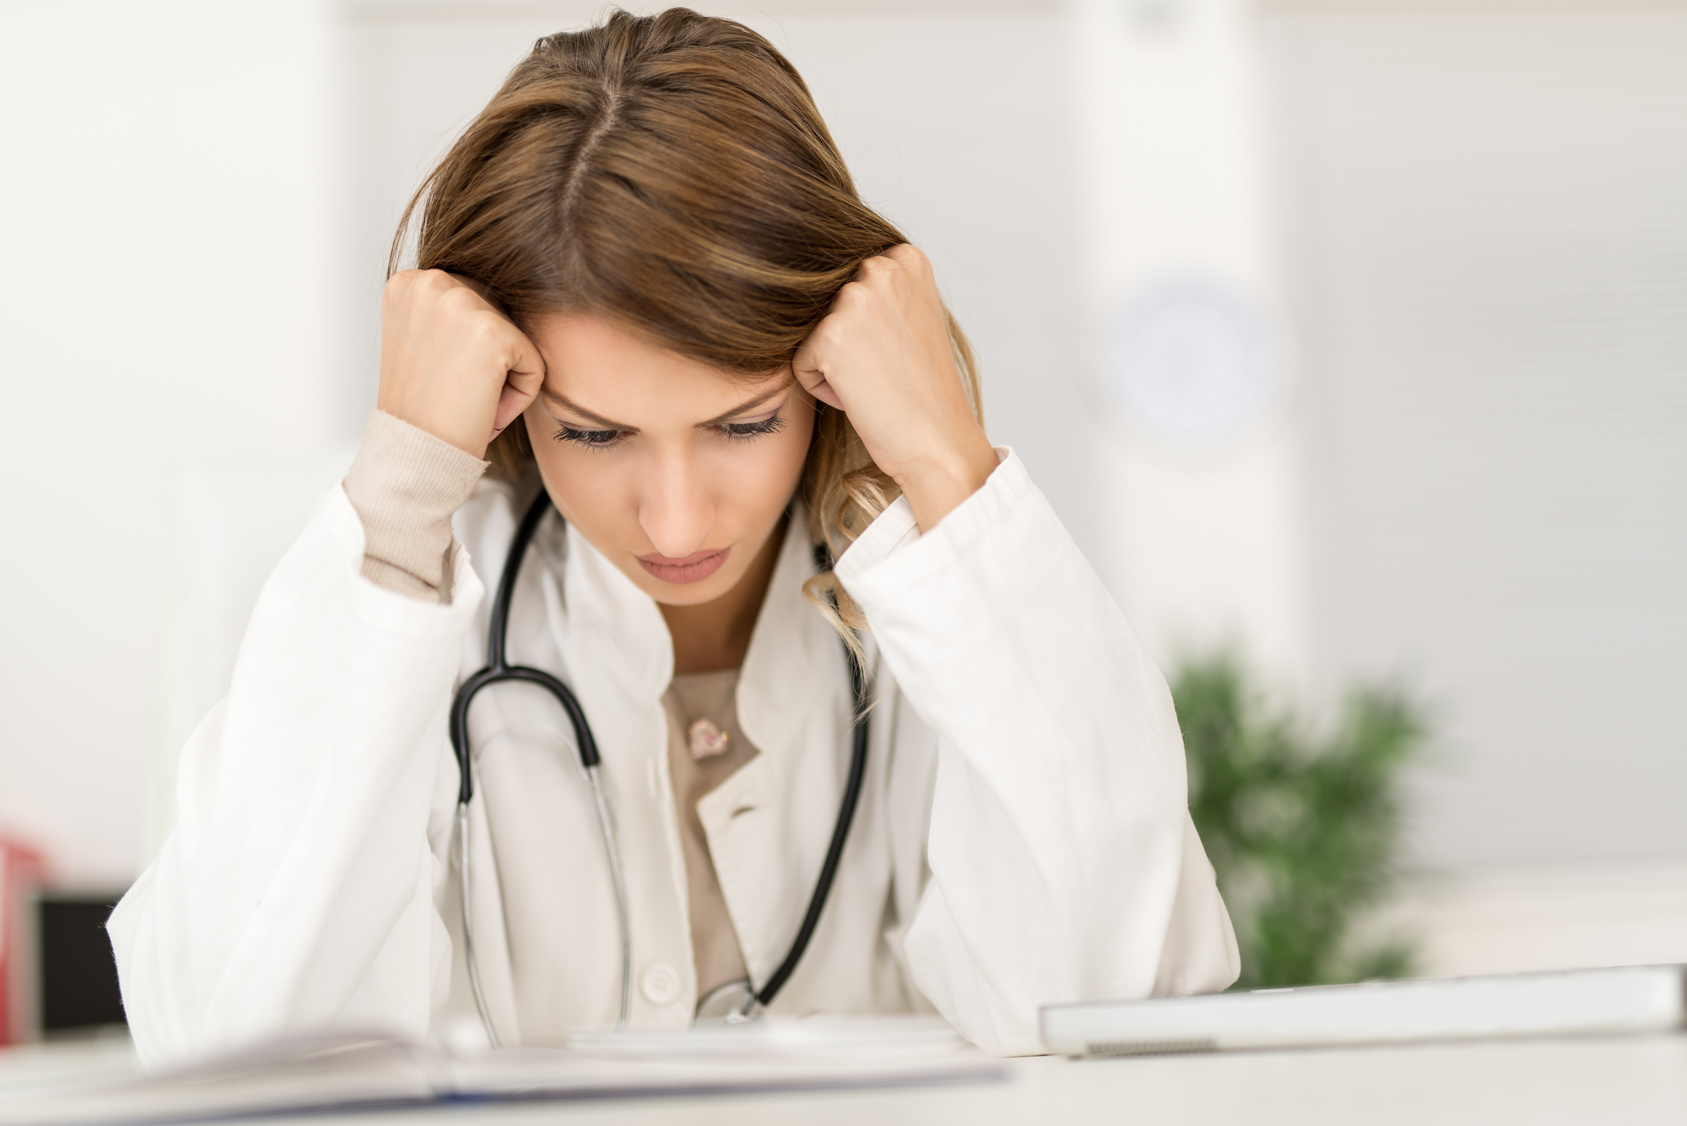 Strategies for Reducing Physician Burnout